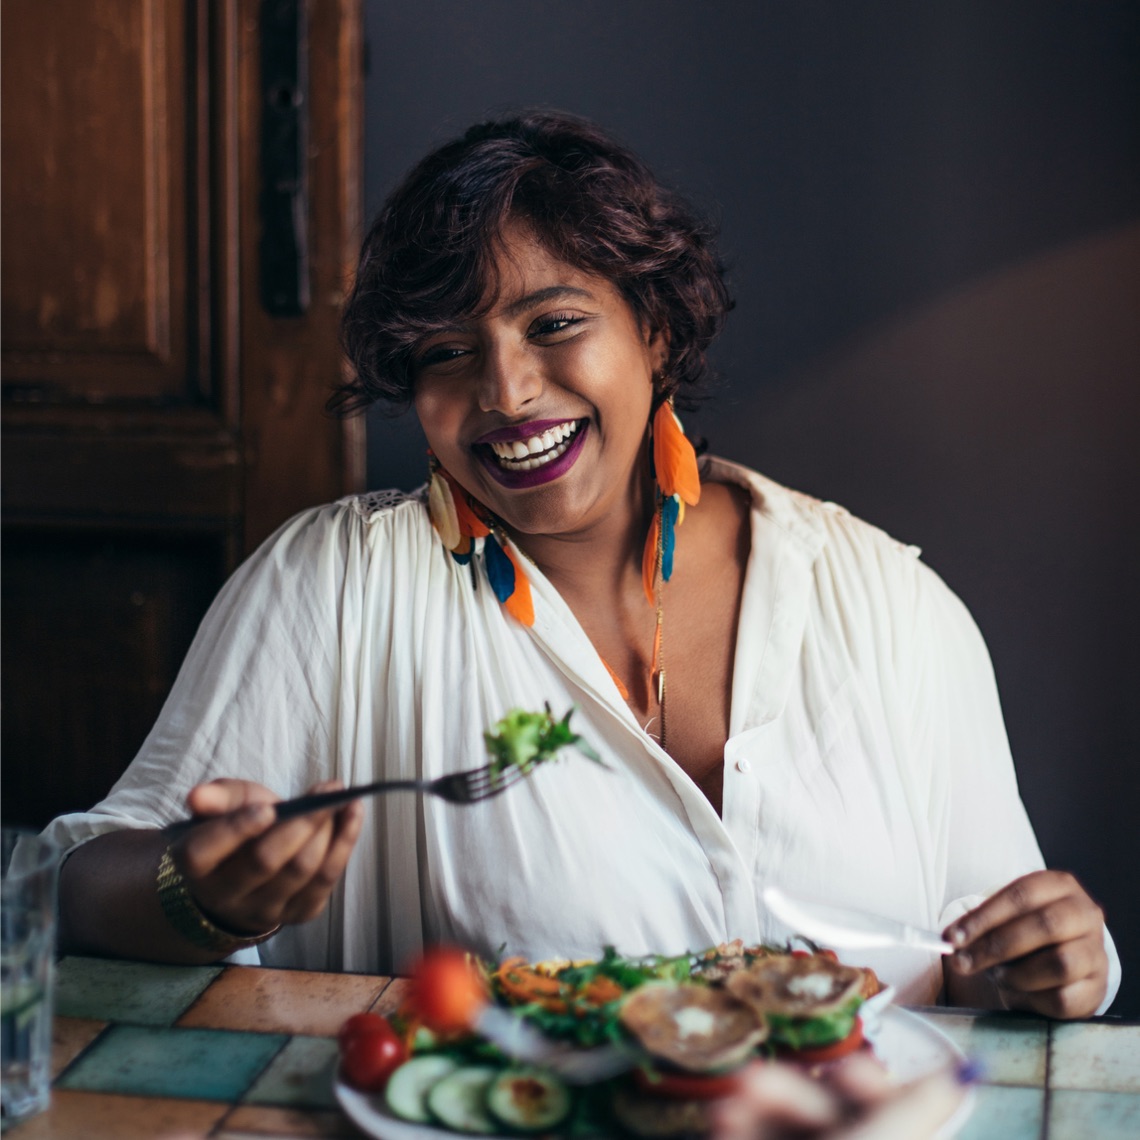 a woman wearing colorful earrings, smiling and eating a fresh salad